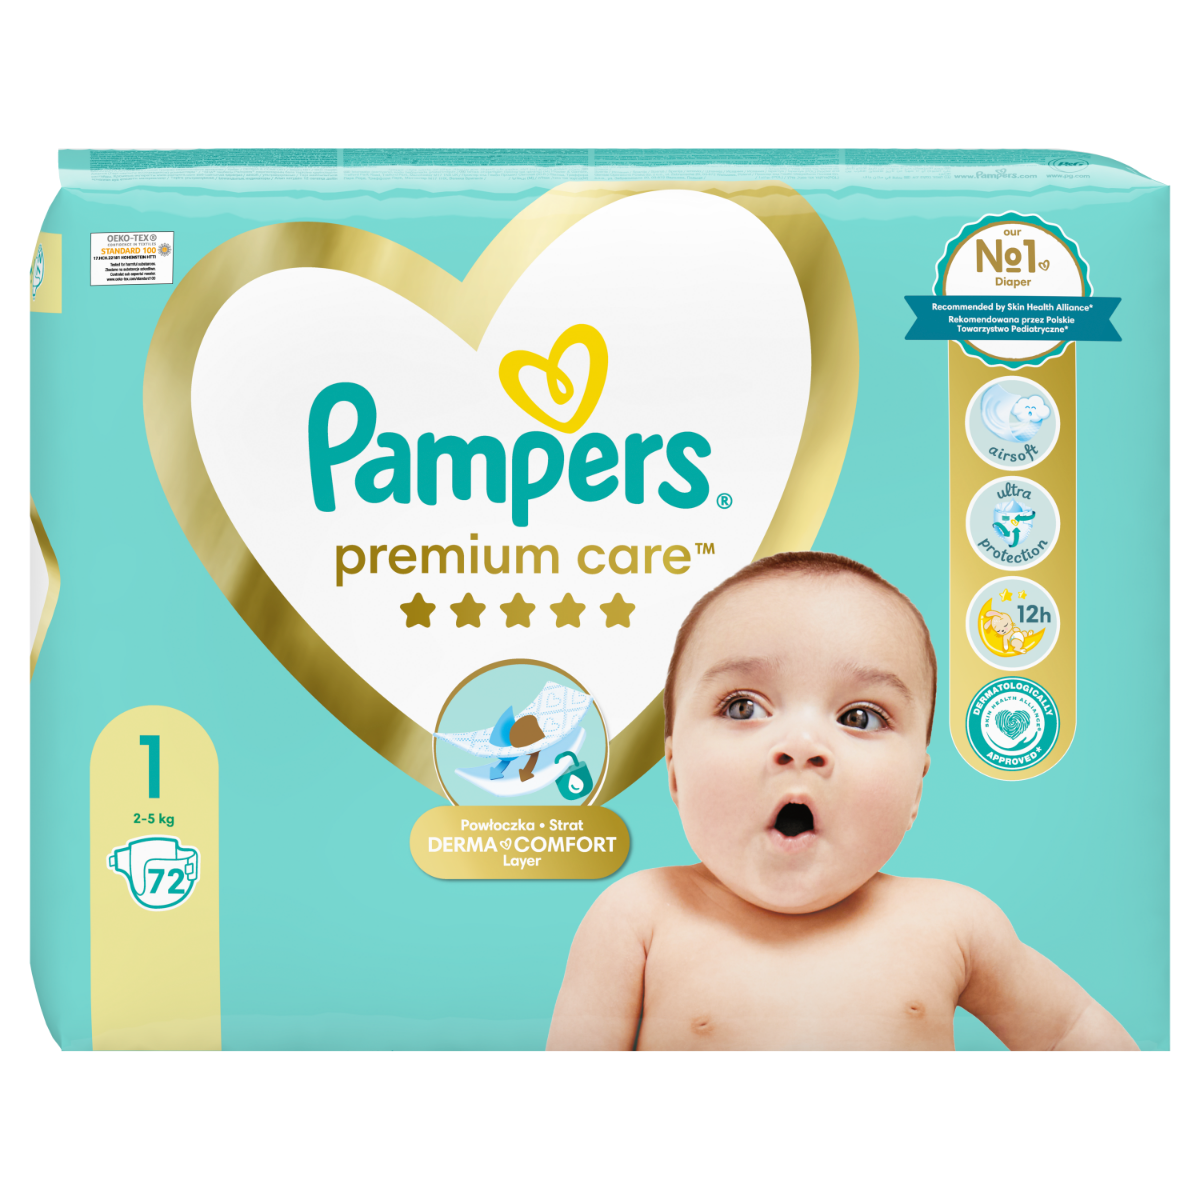 pampers baby dry 6 extra large